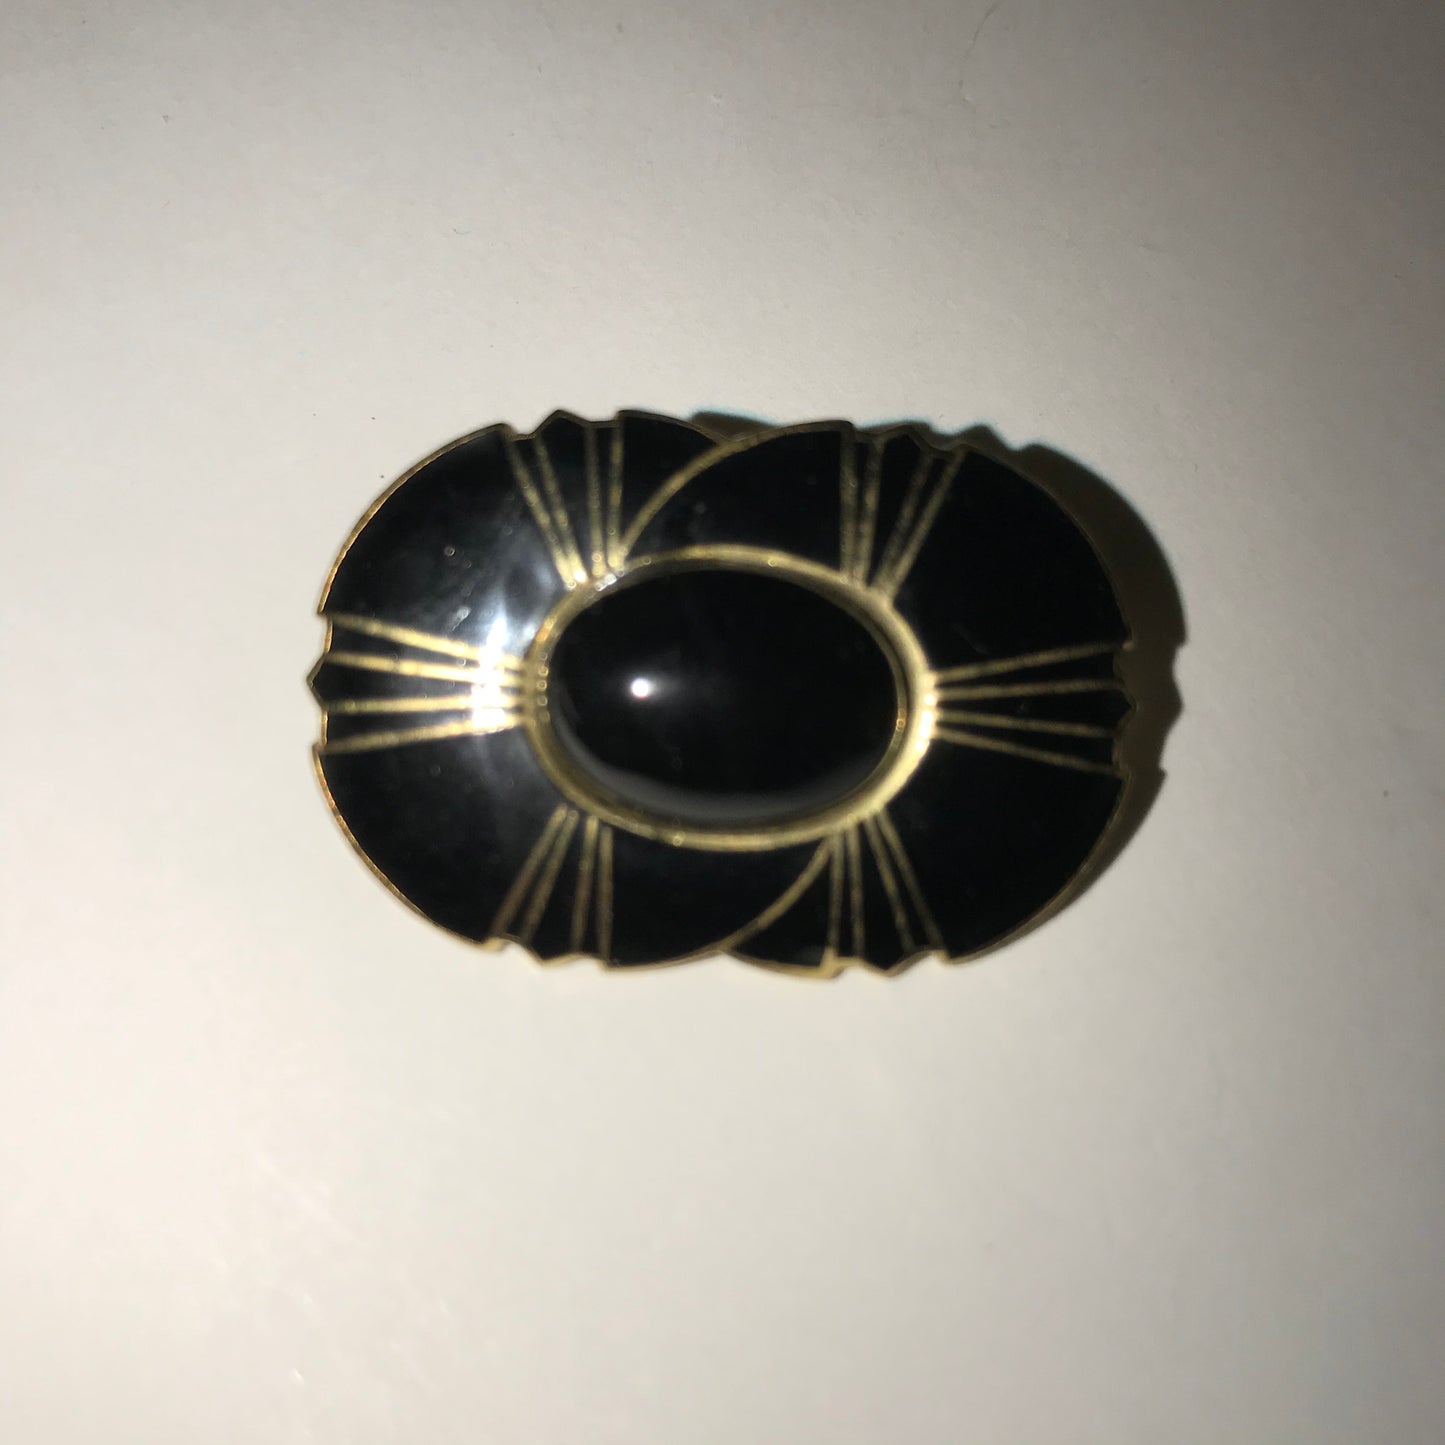 Vintage Oblong Black and gold Mona So Pin